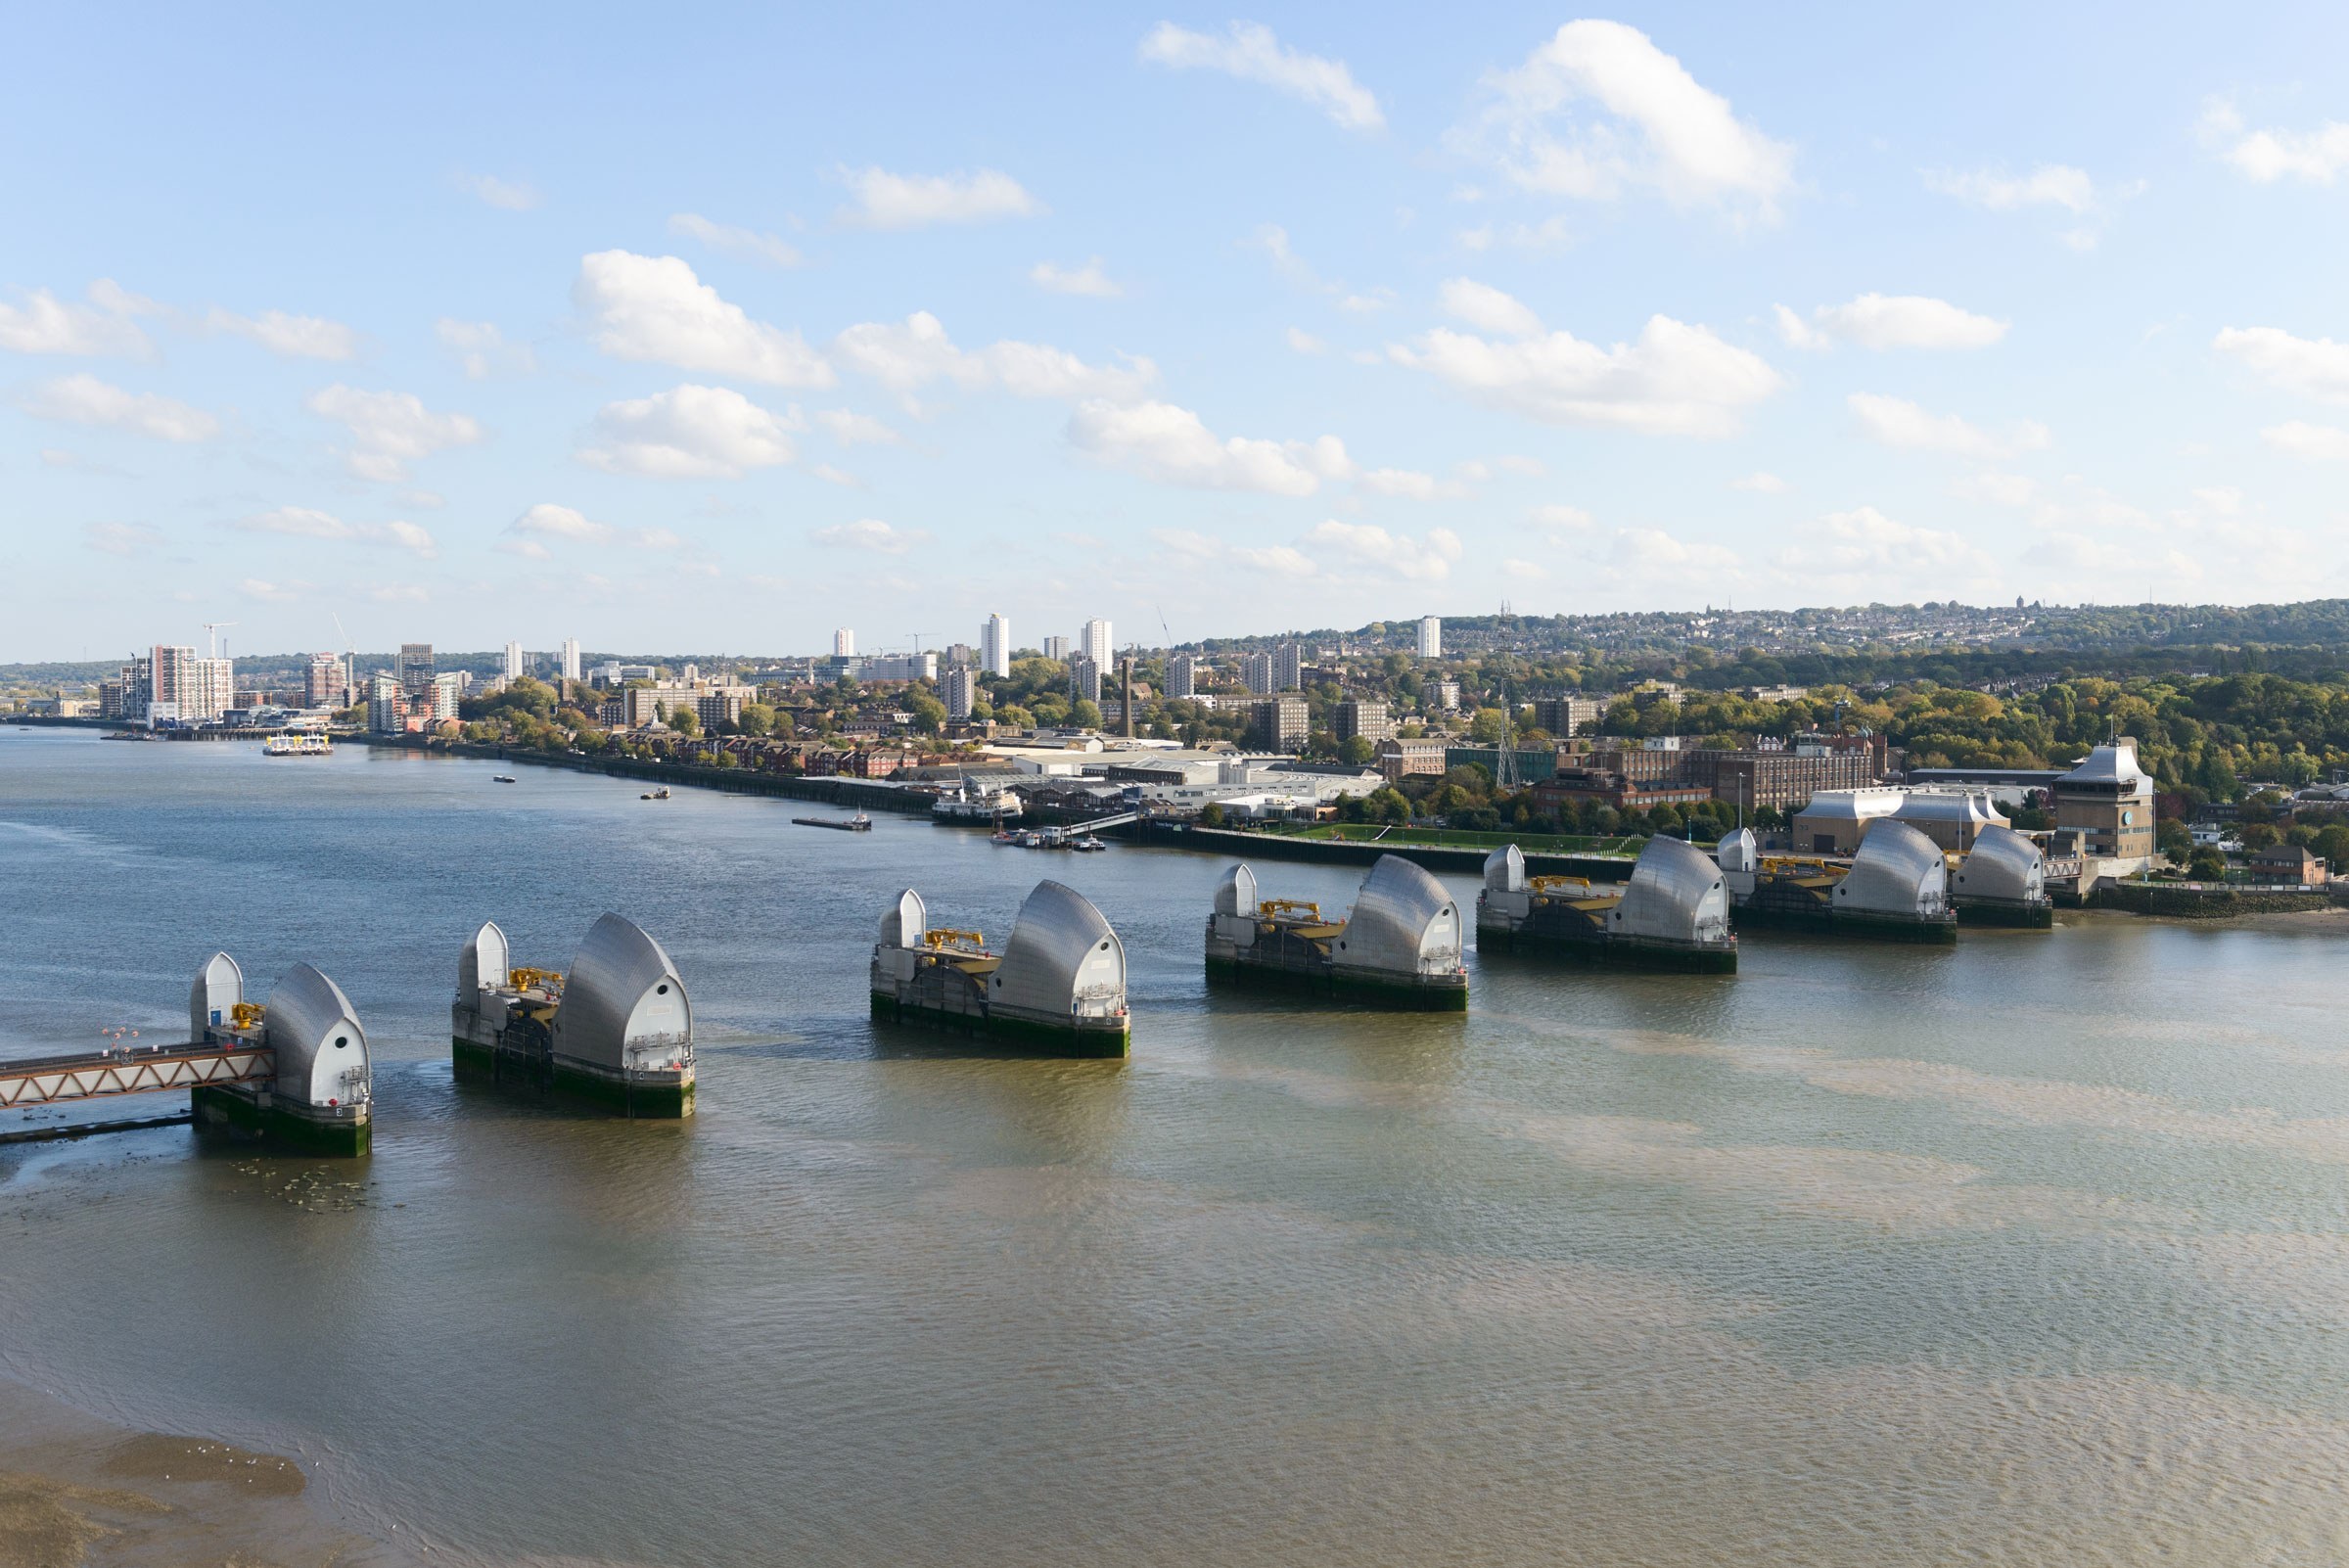 The Thames Barrier seen from above